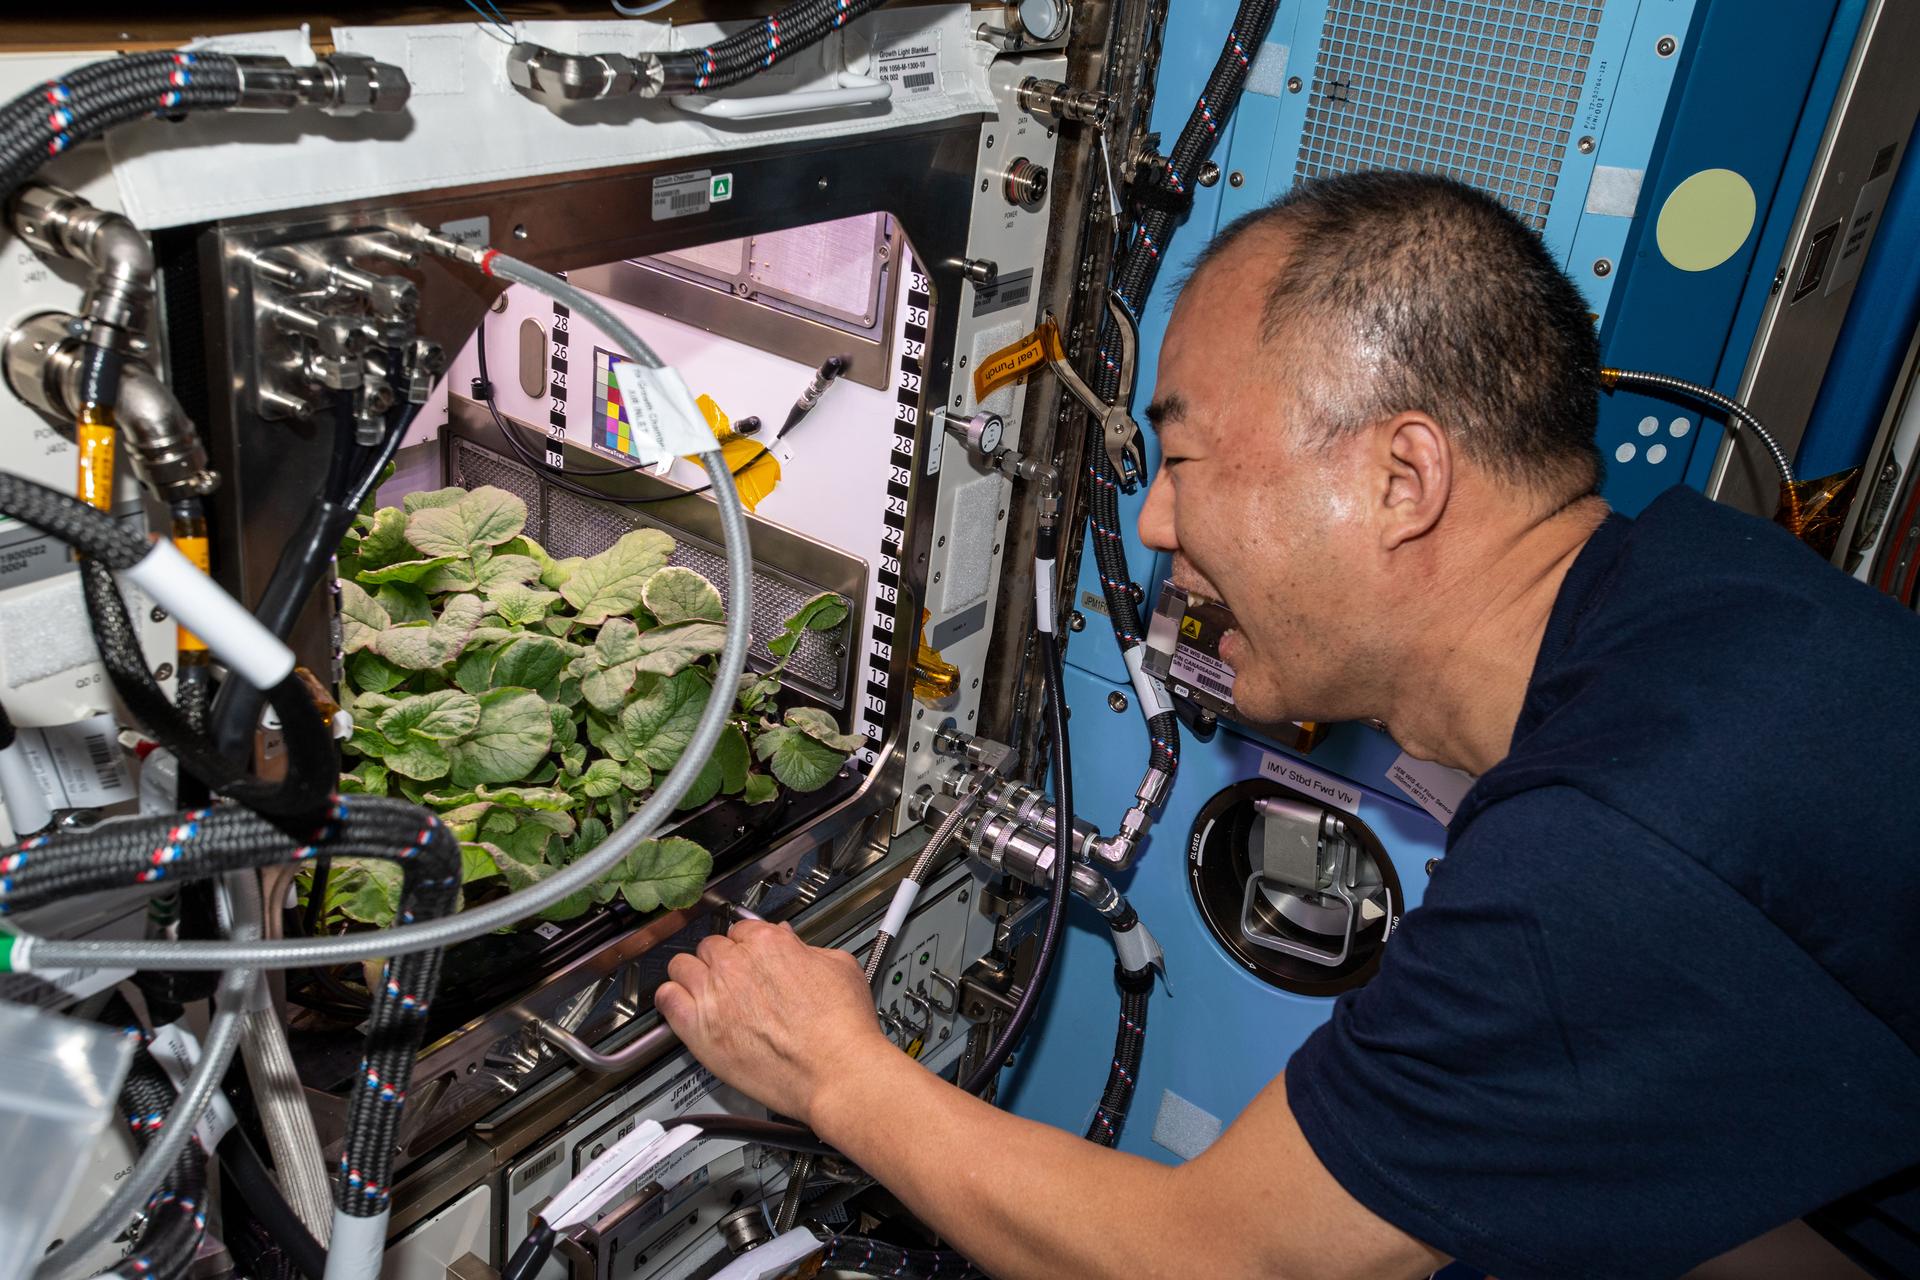 Japan Aerospace Exploration Agency astronaut and Expedition 64 Flight Engineer Soichi Noguchi on the ISS